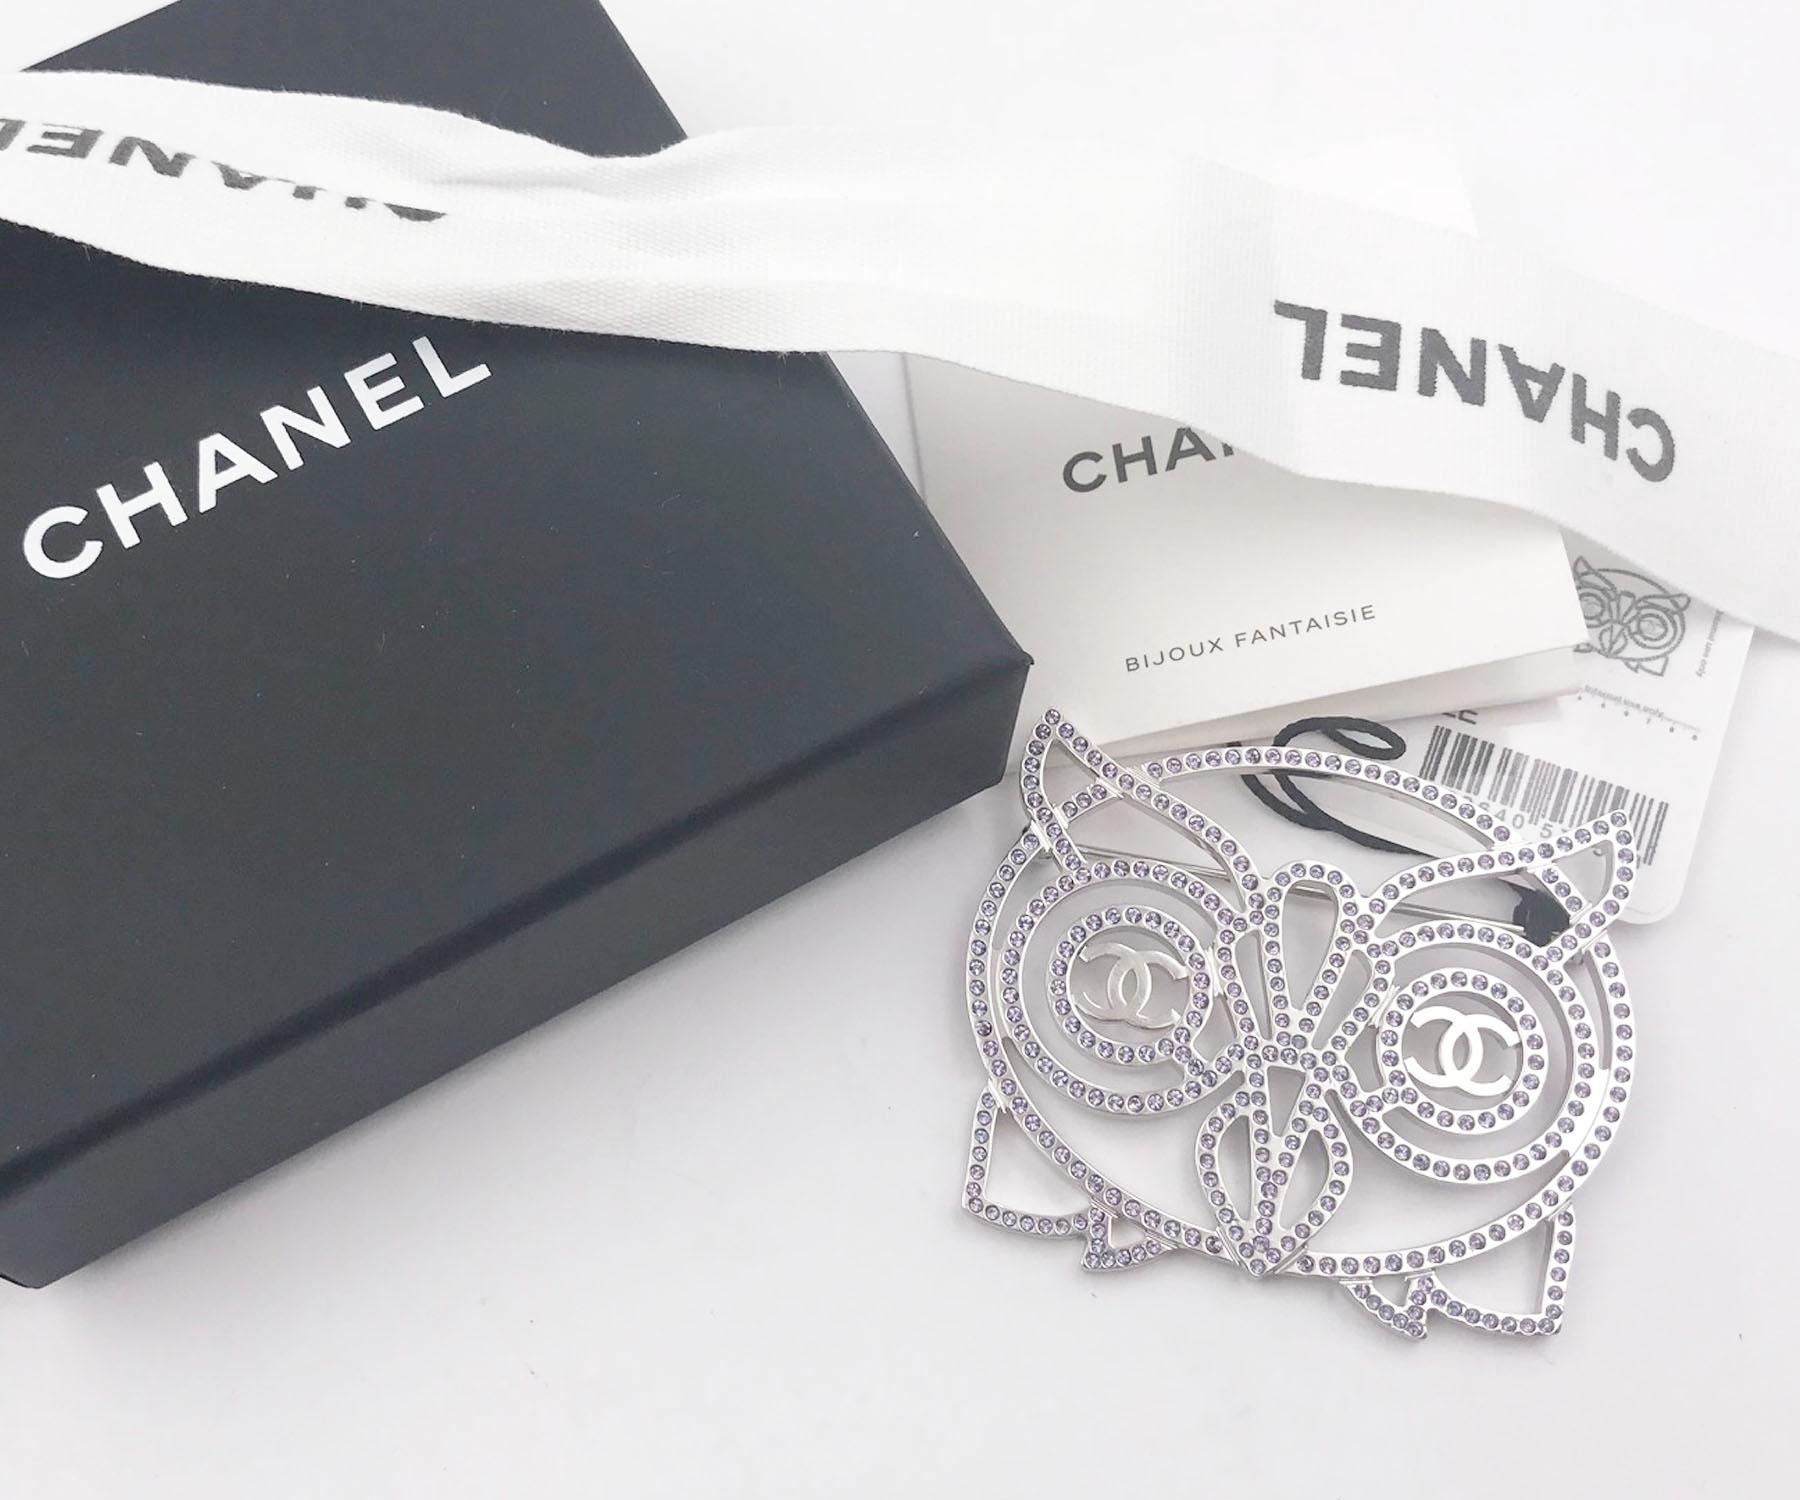 Chanel Brand New Silver Owl Light Lavender Crystal Brooch

*Marked 18
*Comes with original box, pouch, booklet, tag and ribbon
*Brand New

-Approximately 2.25″ x 1.75″
-Very chic and cute

19104-5108

